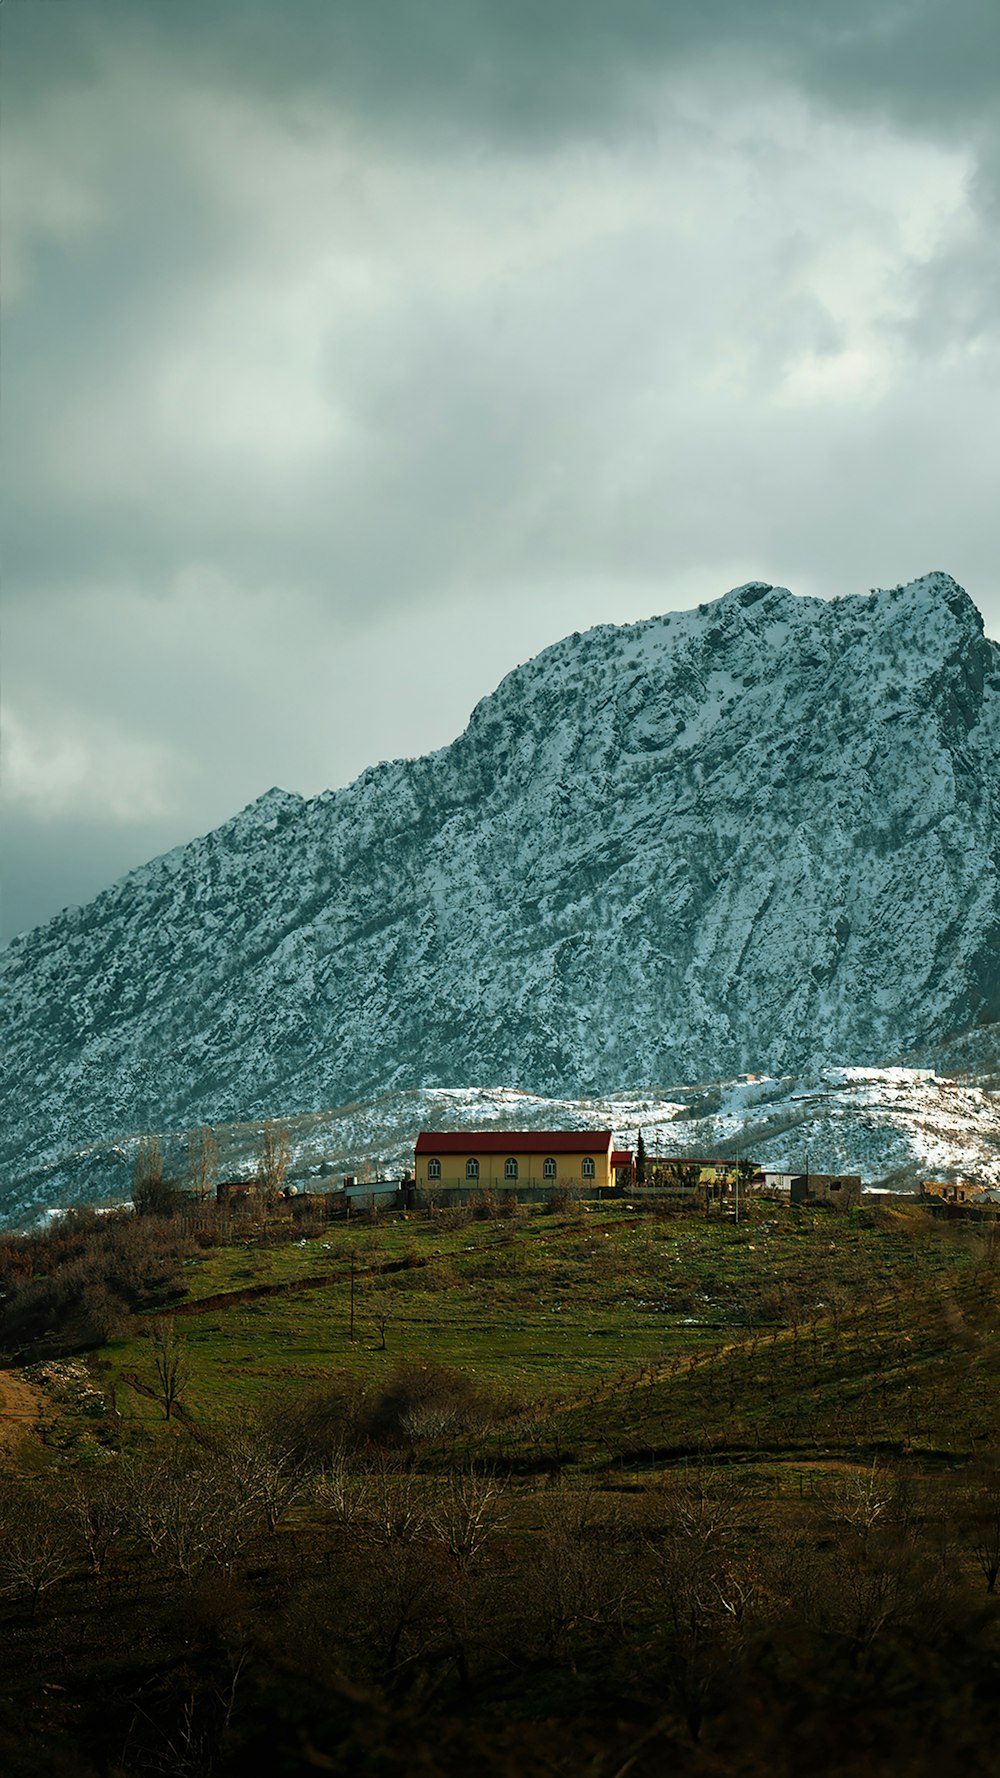 a large snow covered mountain with a house in the foreground